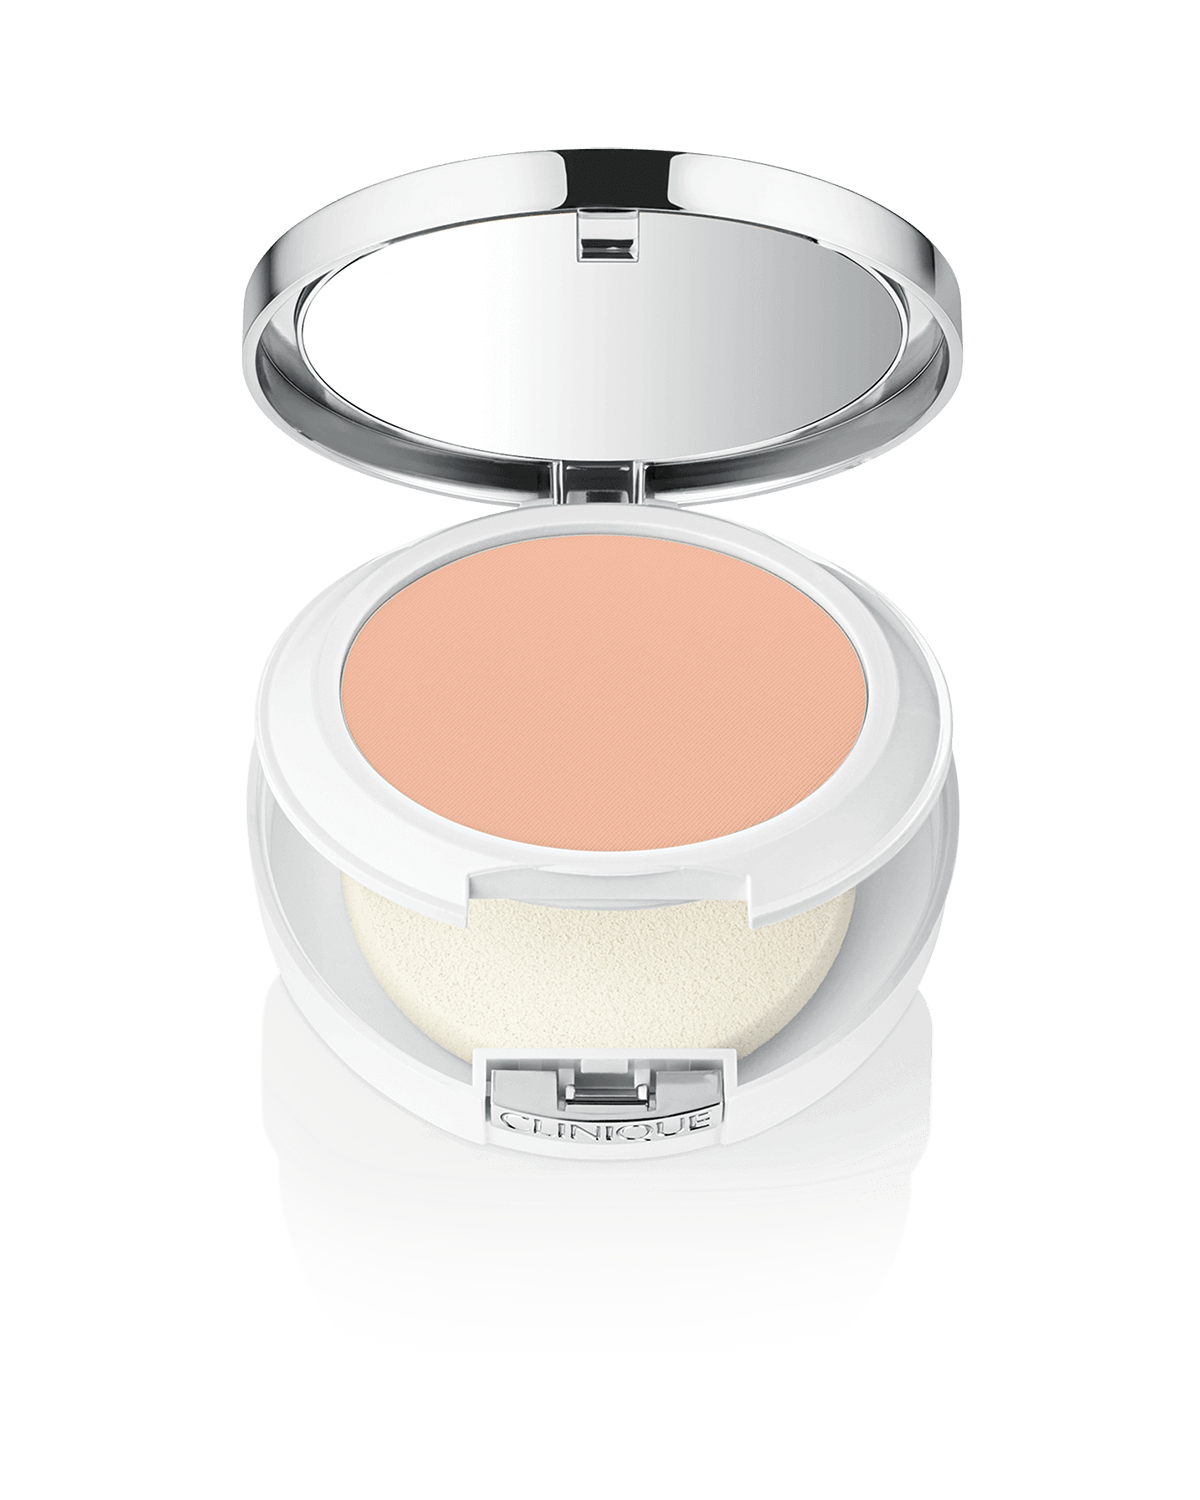 Clinique/Beyond Perfecting Powder Foundation+Concealer